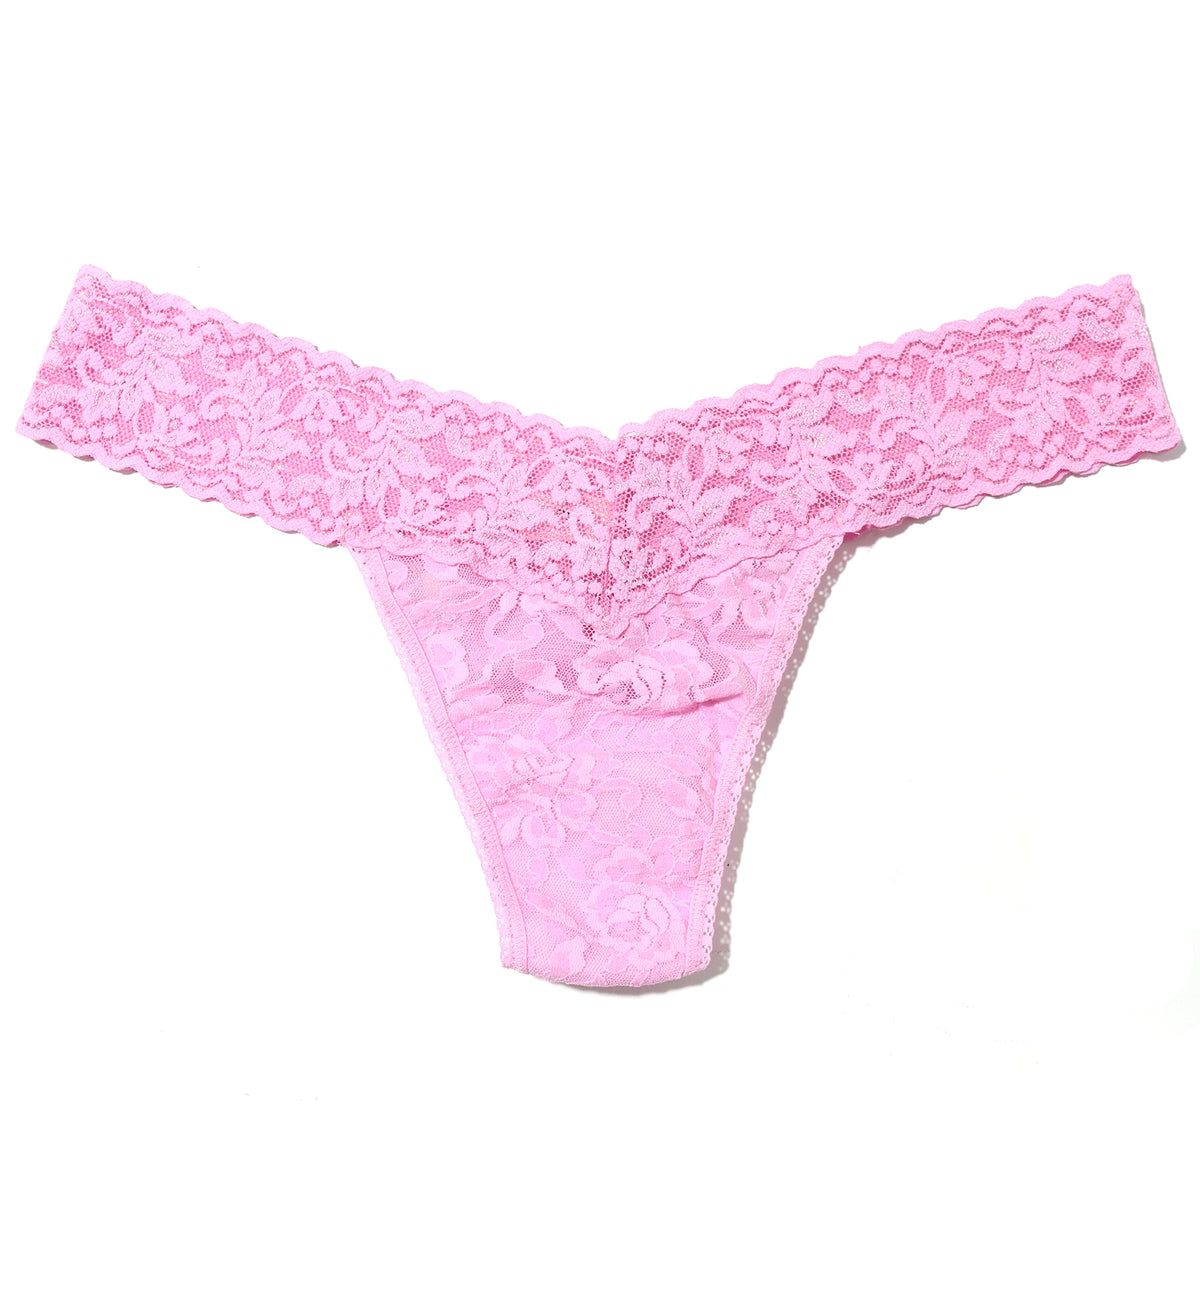 Hanky Panky Signature Lace Low Rise Thong (4911P),Cotton Candy - Cotton Candy,One Size